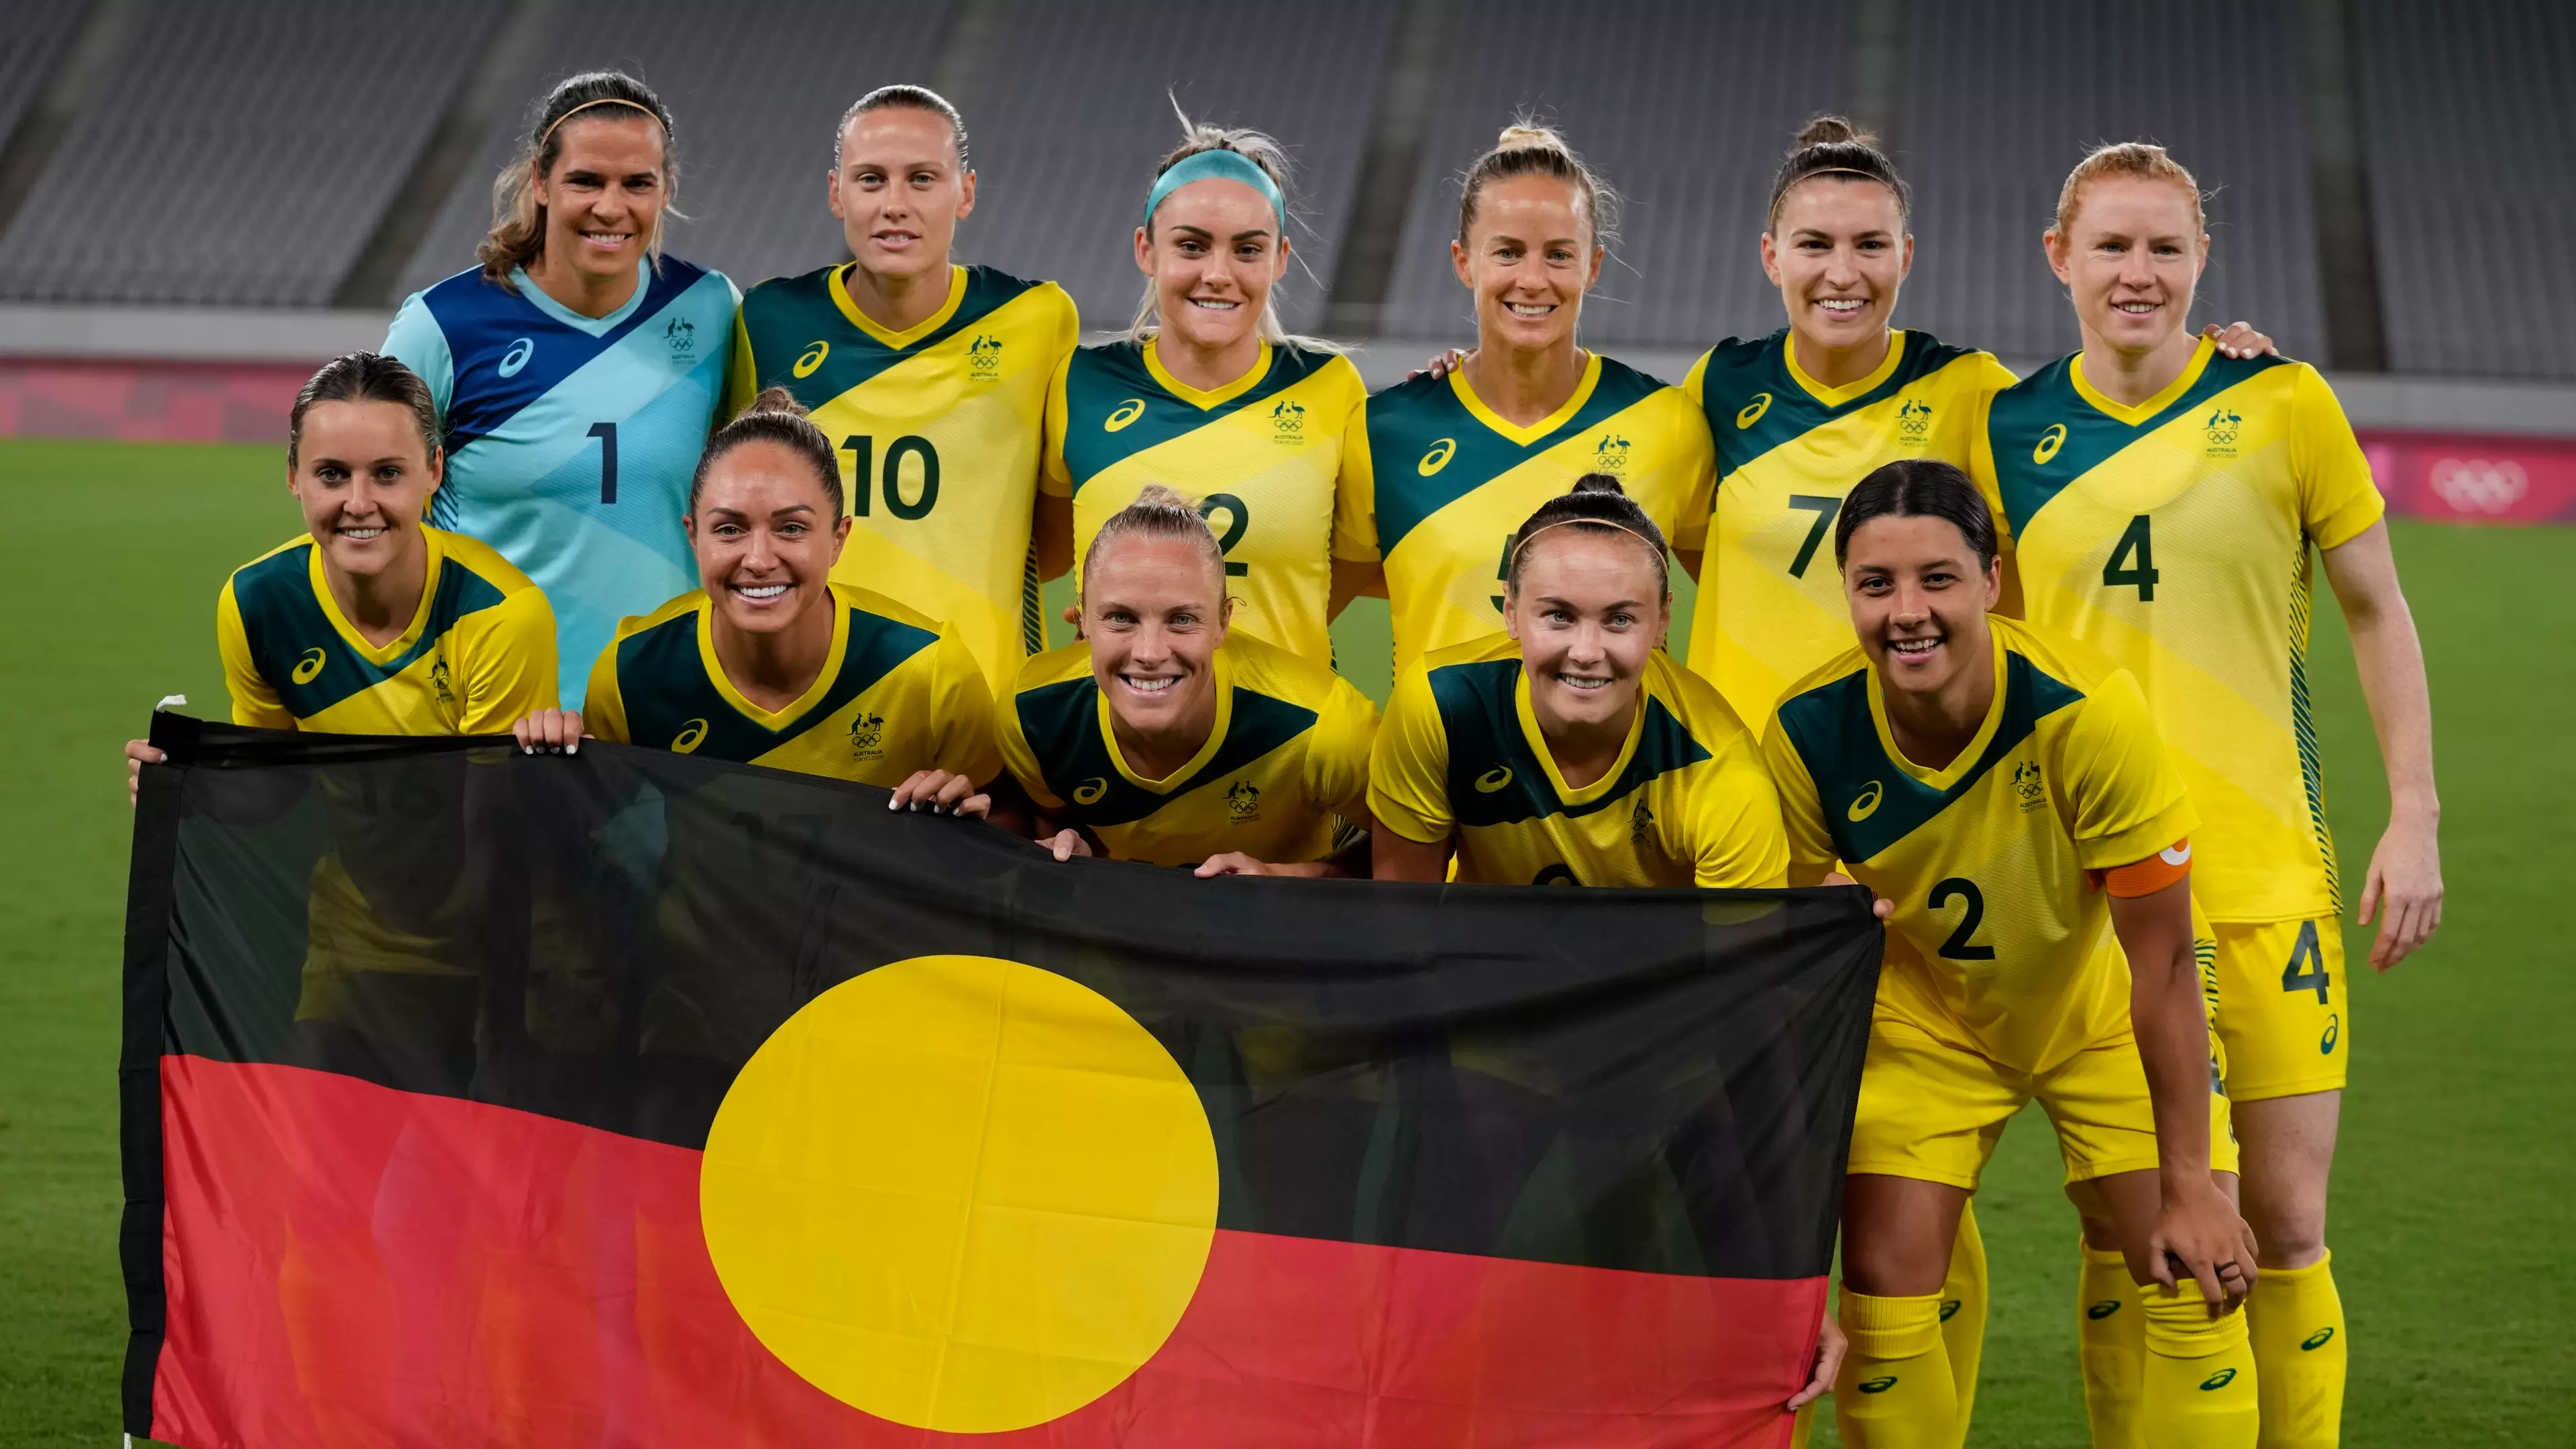 Matildas Hold Aboriginal Flag For Team Photo Before First Olympic Games Match